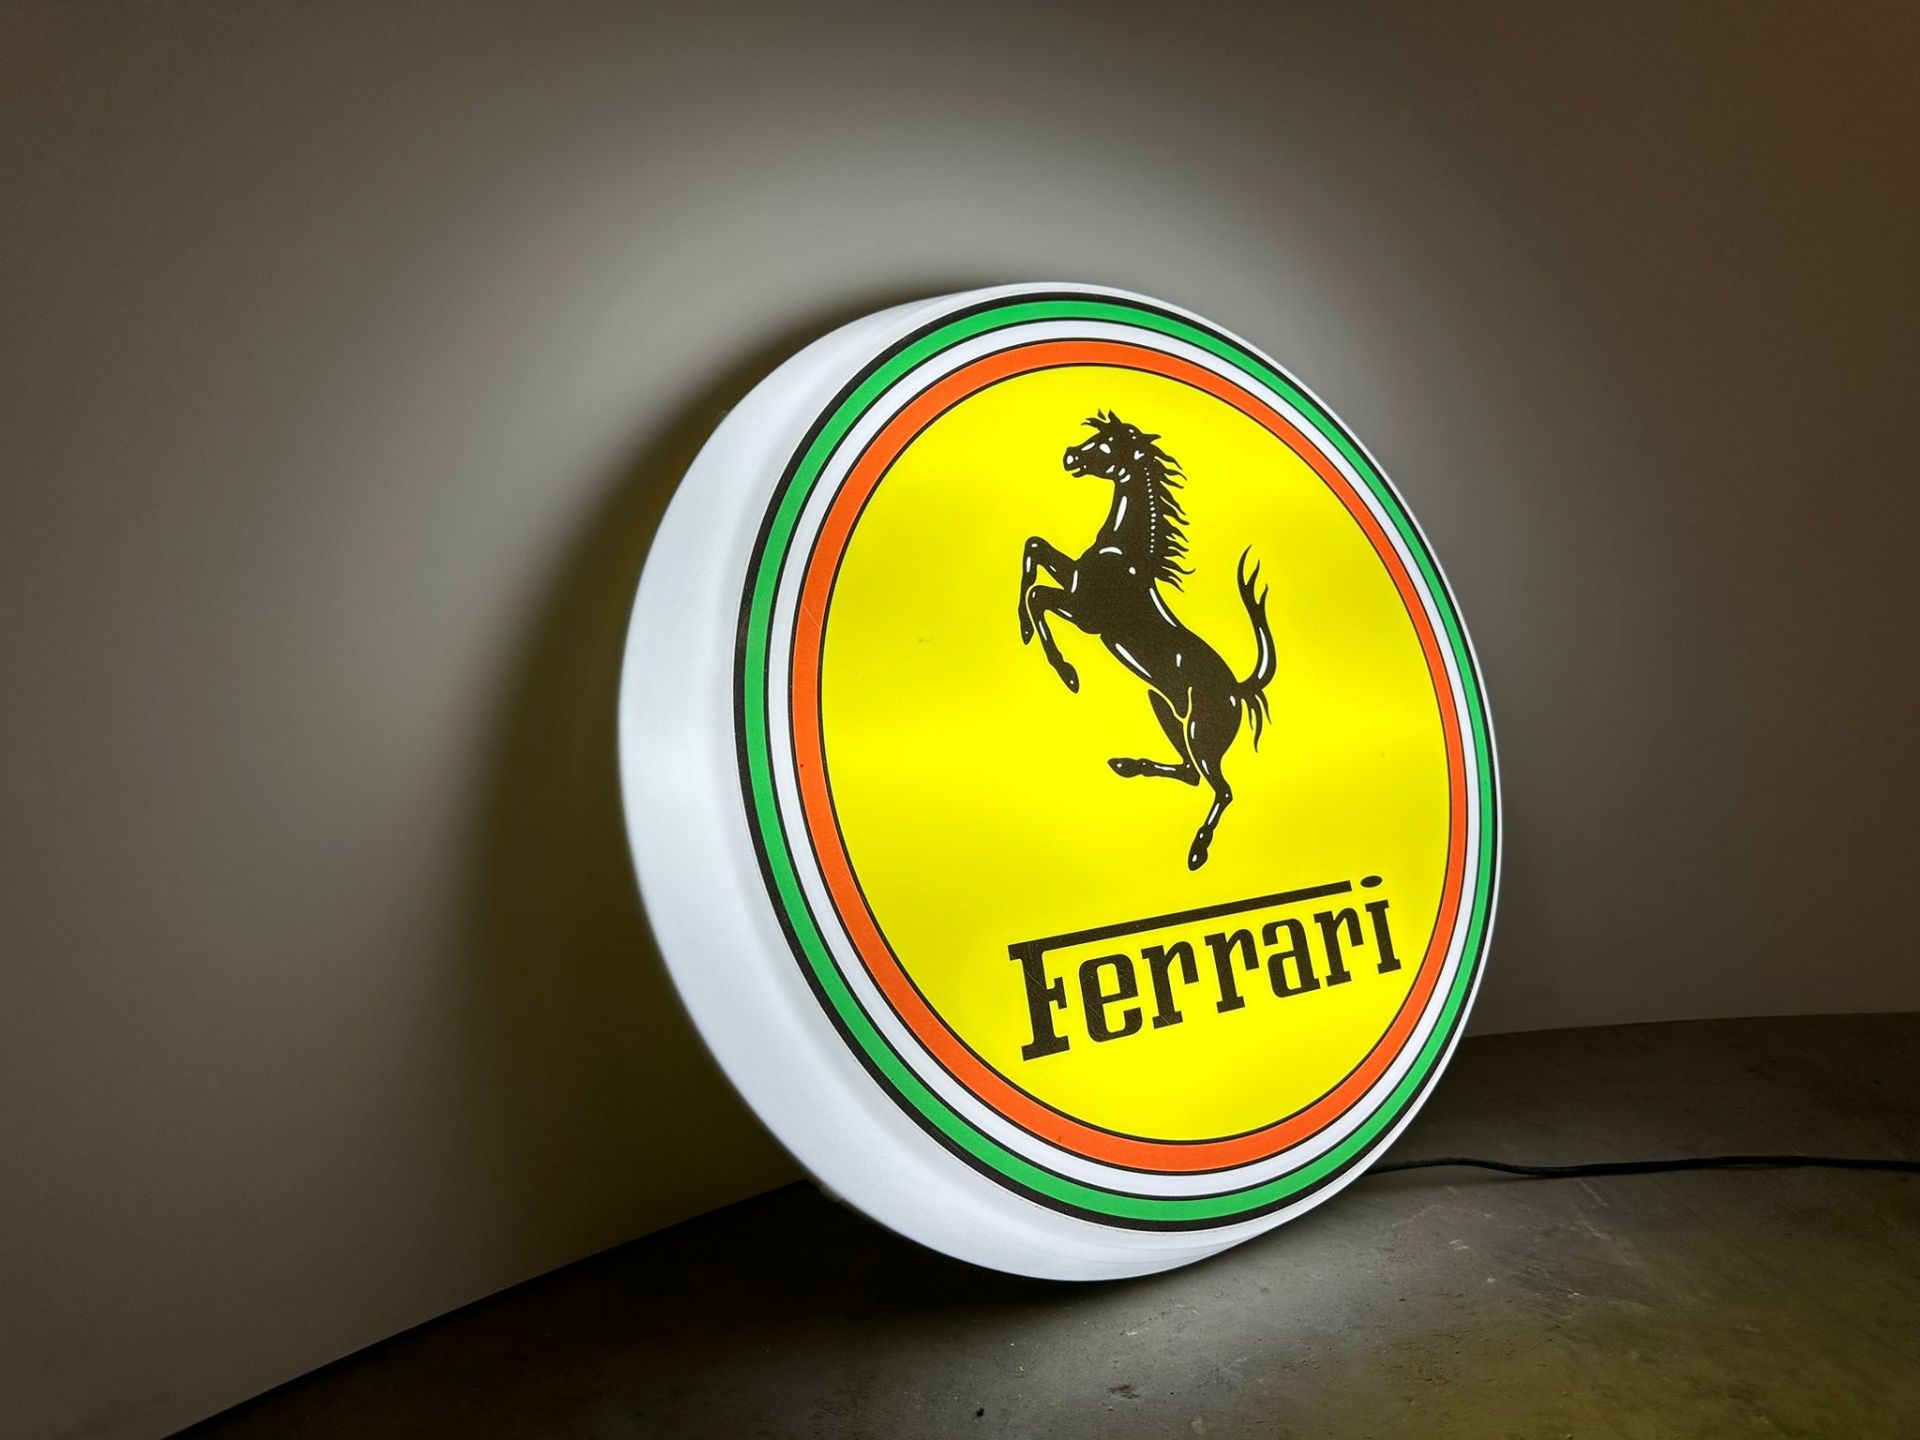 Ferrari fully working illuminated adapted to any country - Image 2 of 6